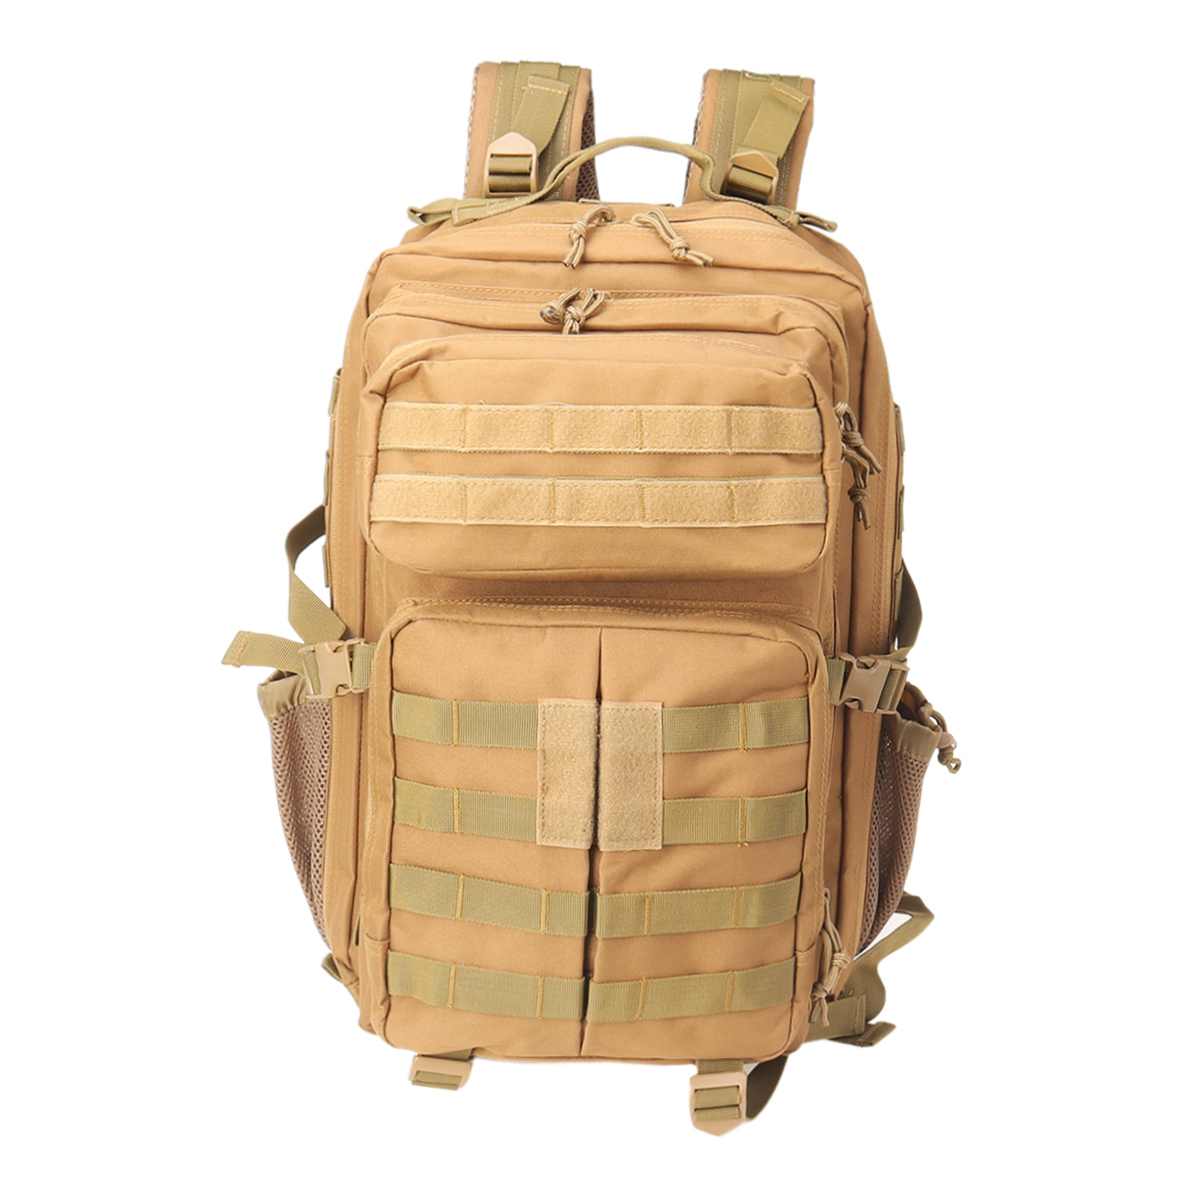 45L-900D-Waterproof-Tactical-Backpack-Oxford-Cloth-Molle-Military-Outdoor-Bag-Traveling-Camping-Hiki-1560781-3